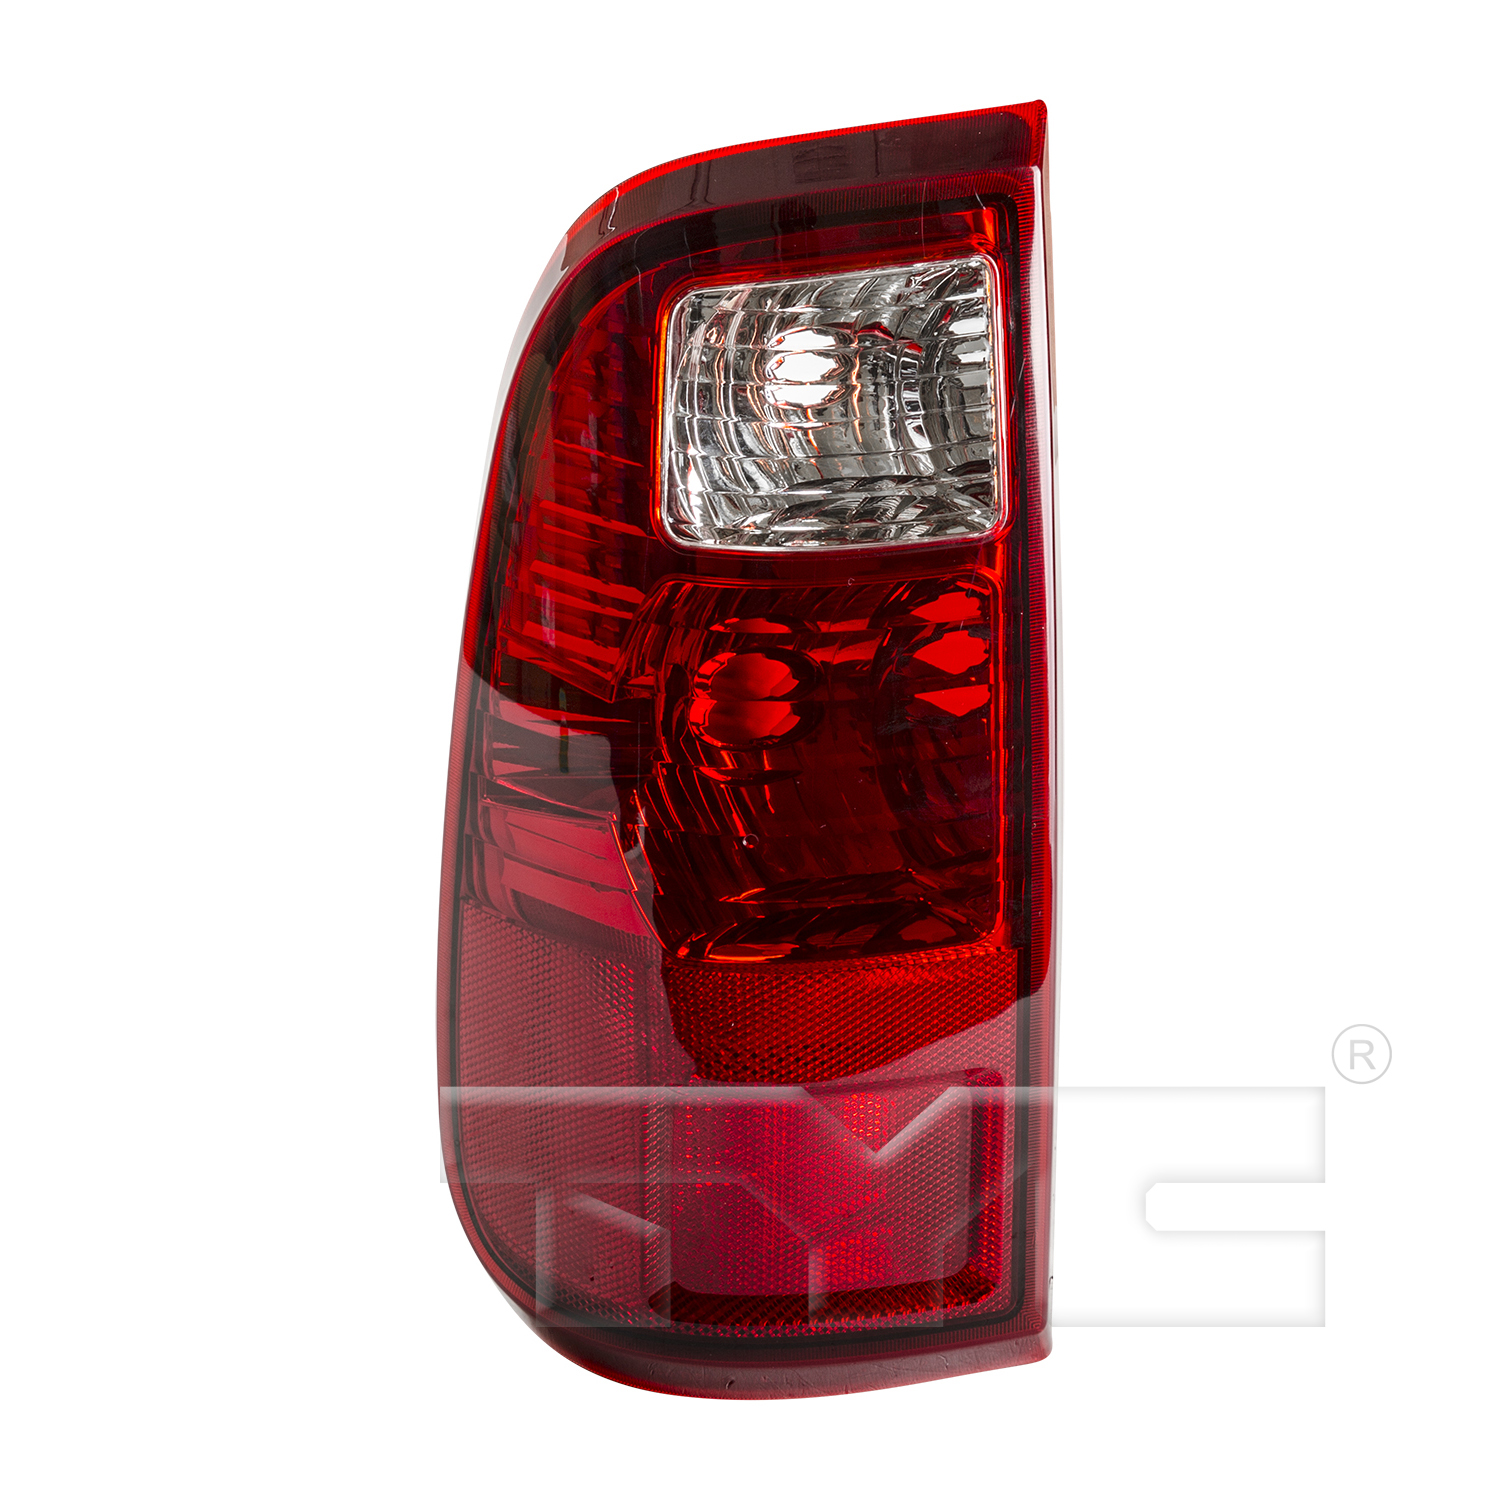 Aftermarket TAILLIGHTS for FORD - F-250 SUPER DUTY, F-250 SUPER DUTY,08-16,LT Taillamp assy